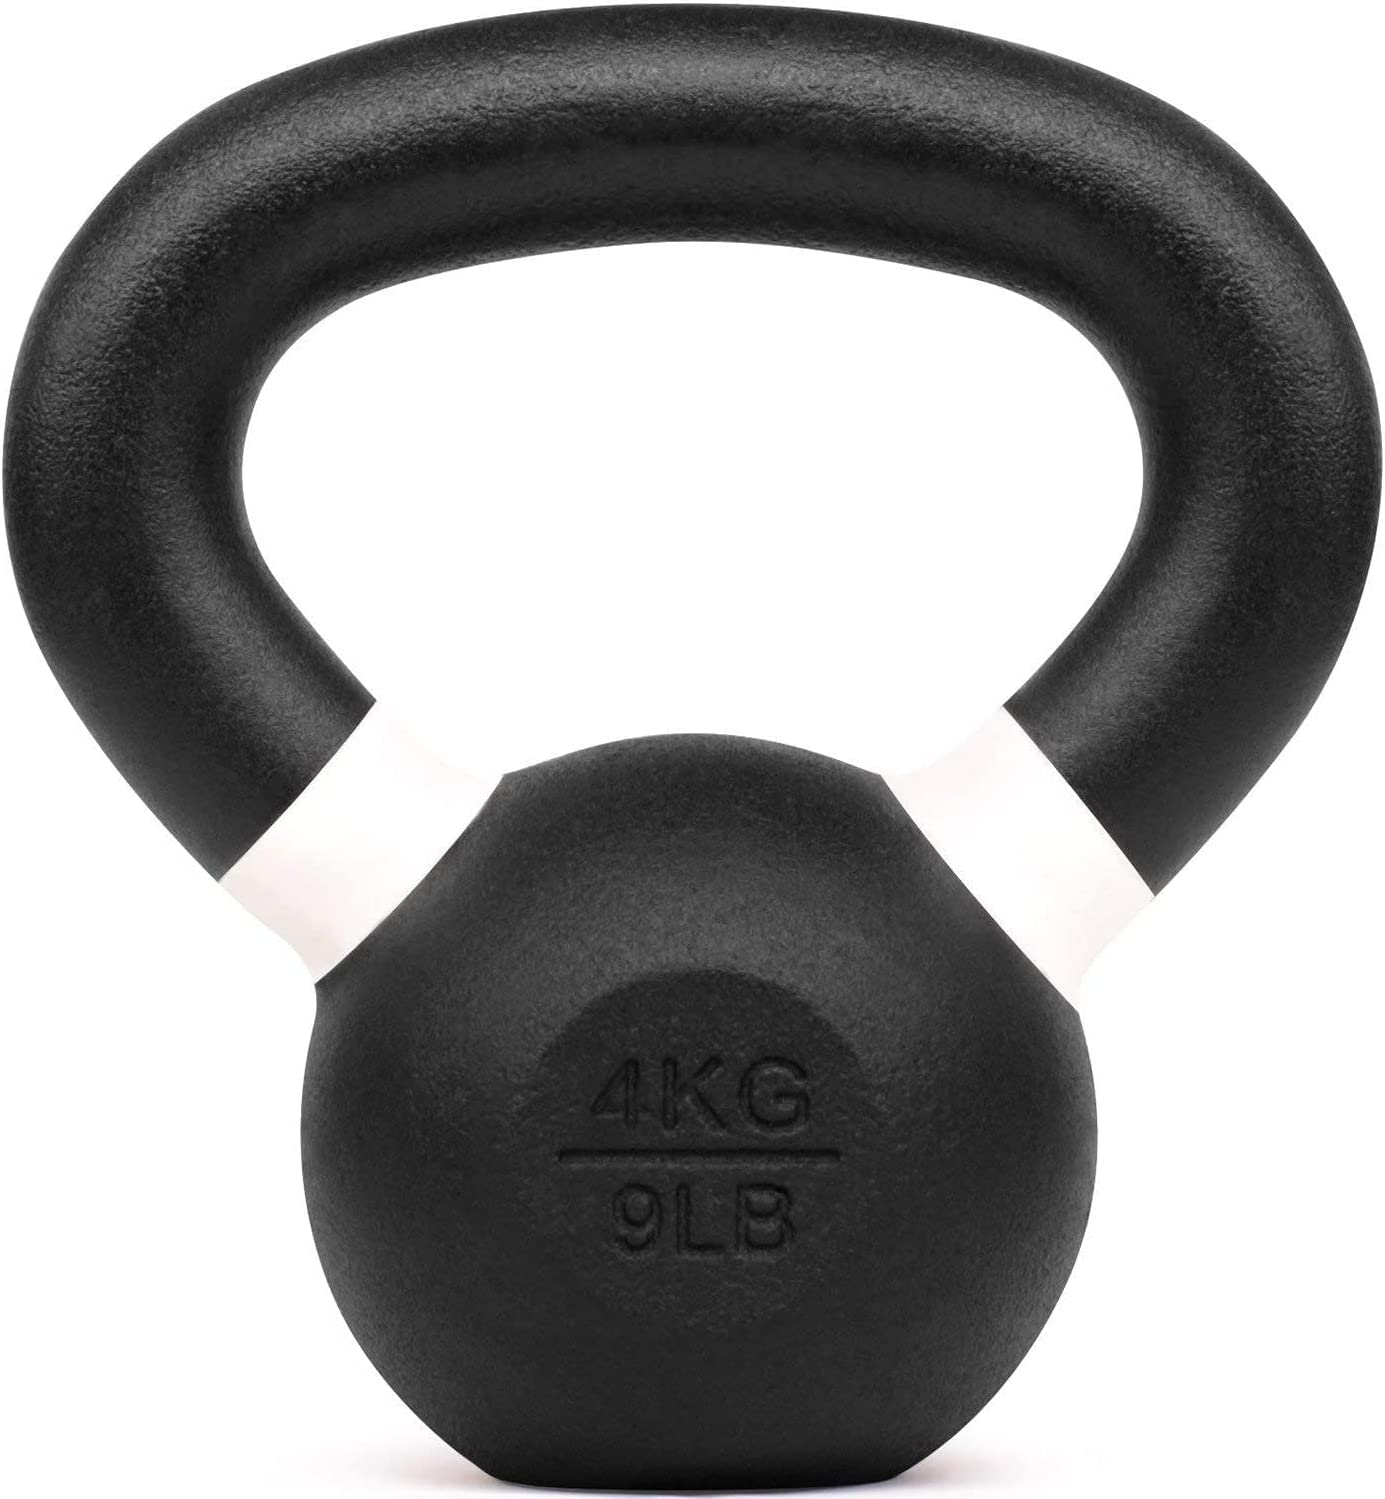 Yes4All 4kg / 9lb Powder Coated Kettlebell, Single - image 1 of 9